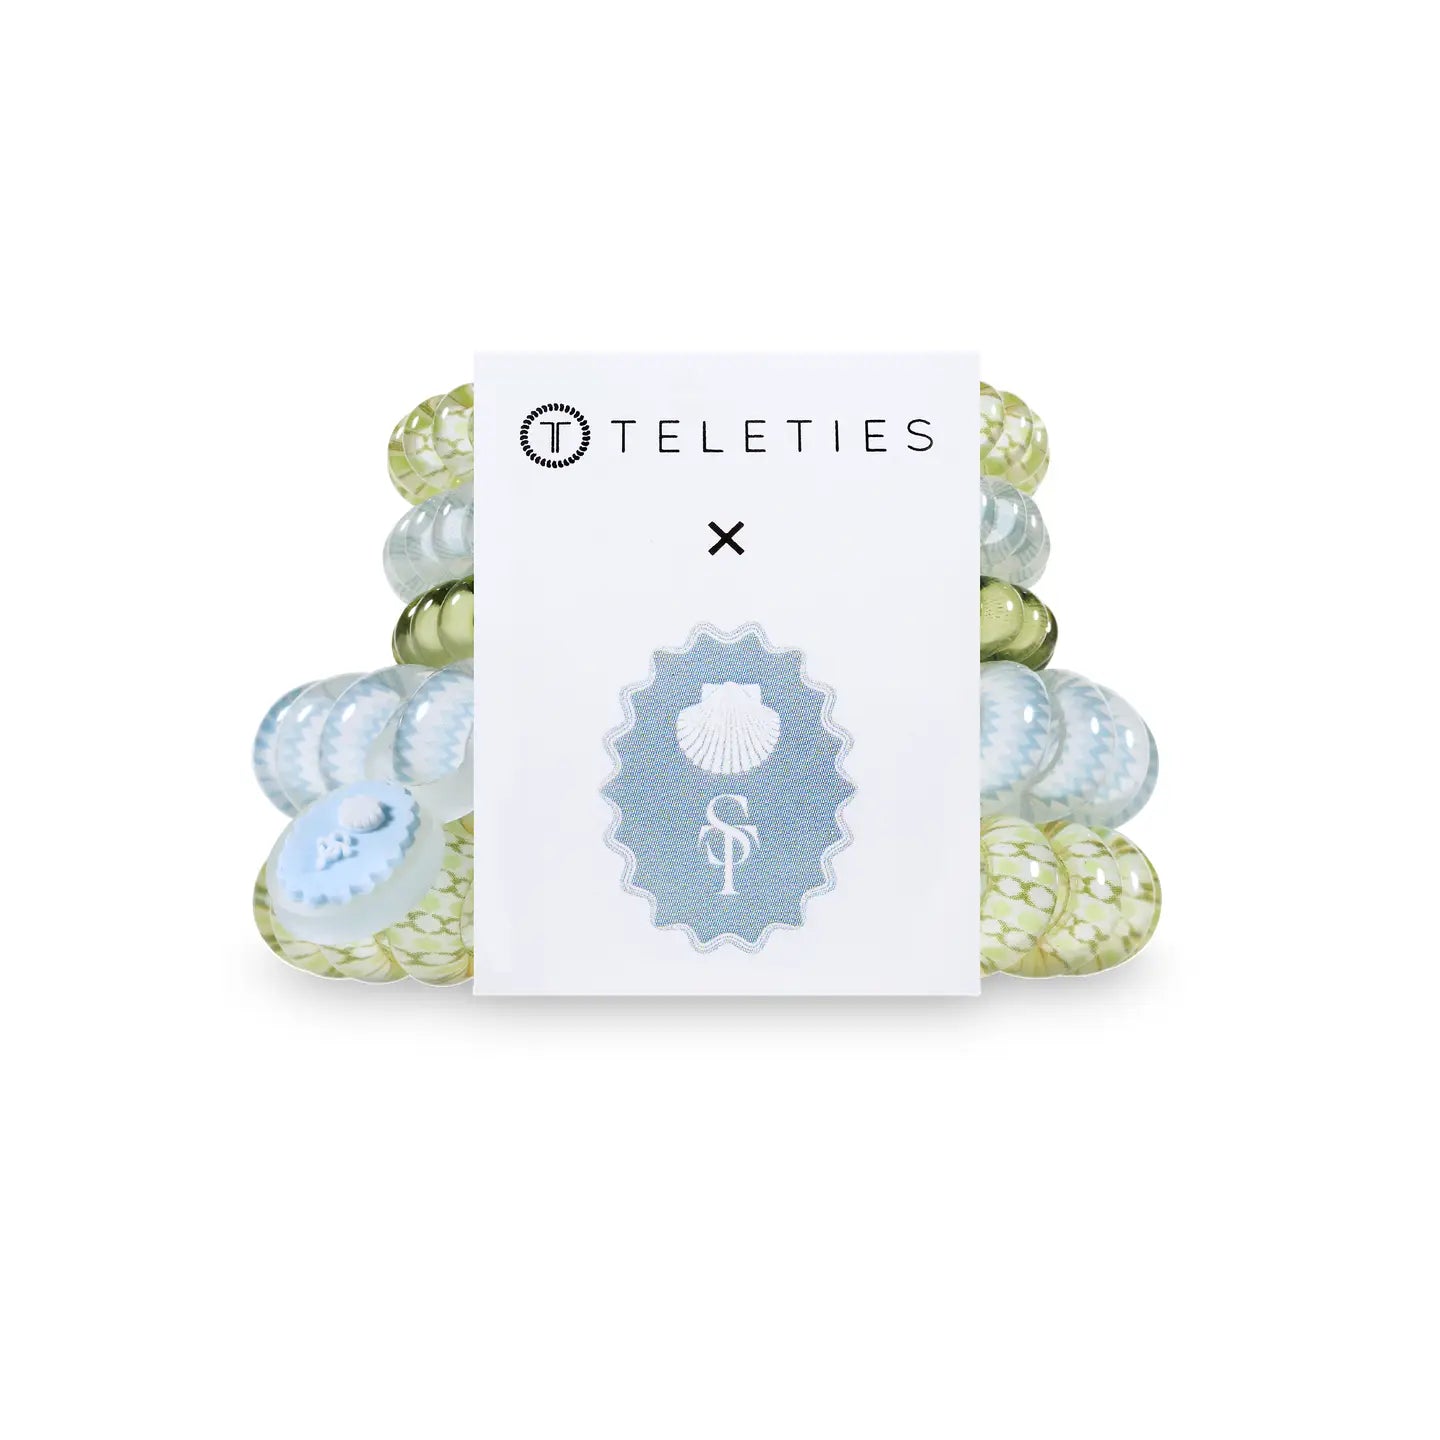 set of 5 teletie hair coils: one small pastel green, one small plaid light blue, on small plaid light green, one large chevron light blue, and one large plaid light green  